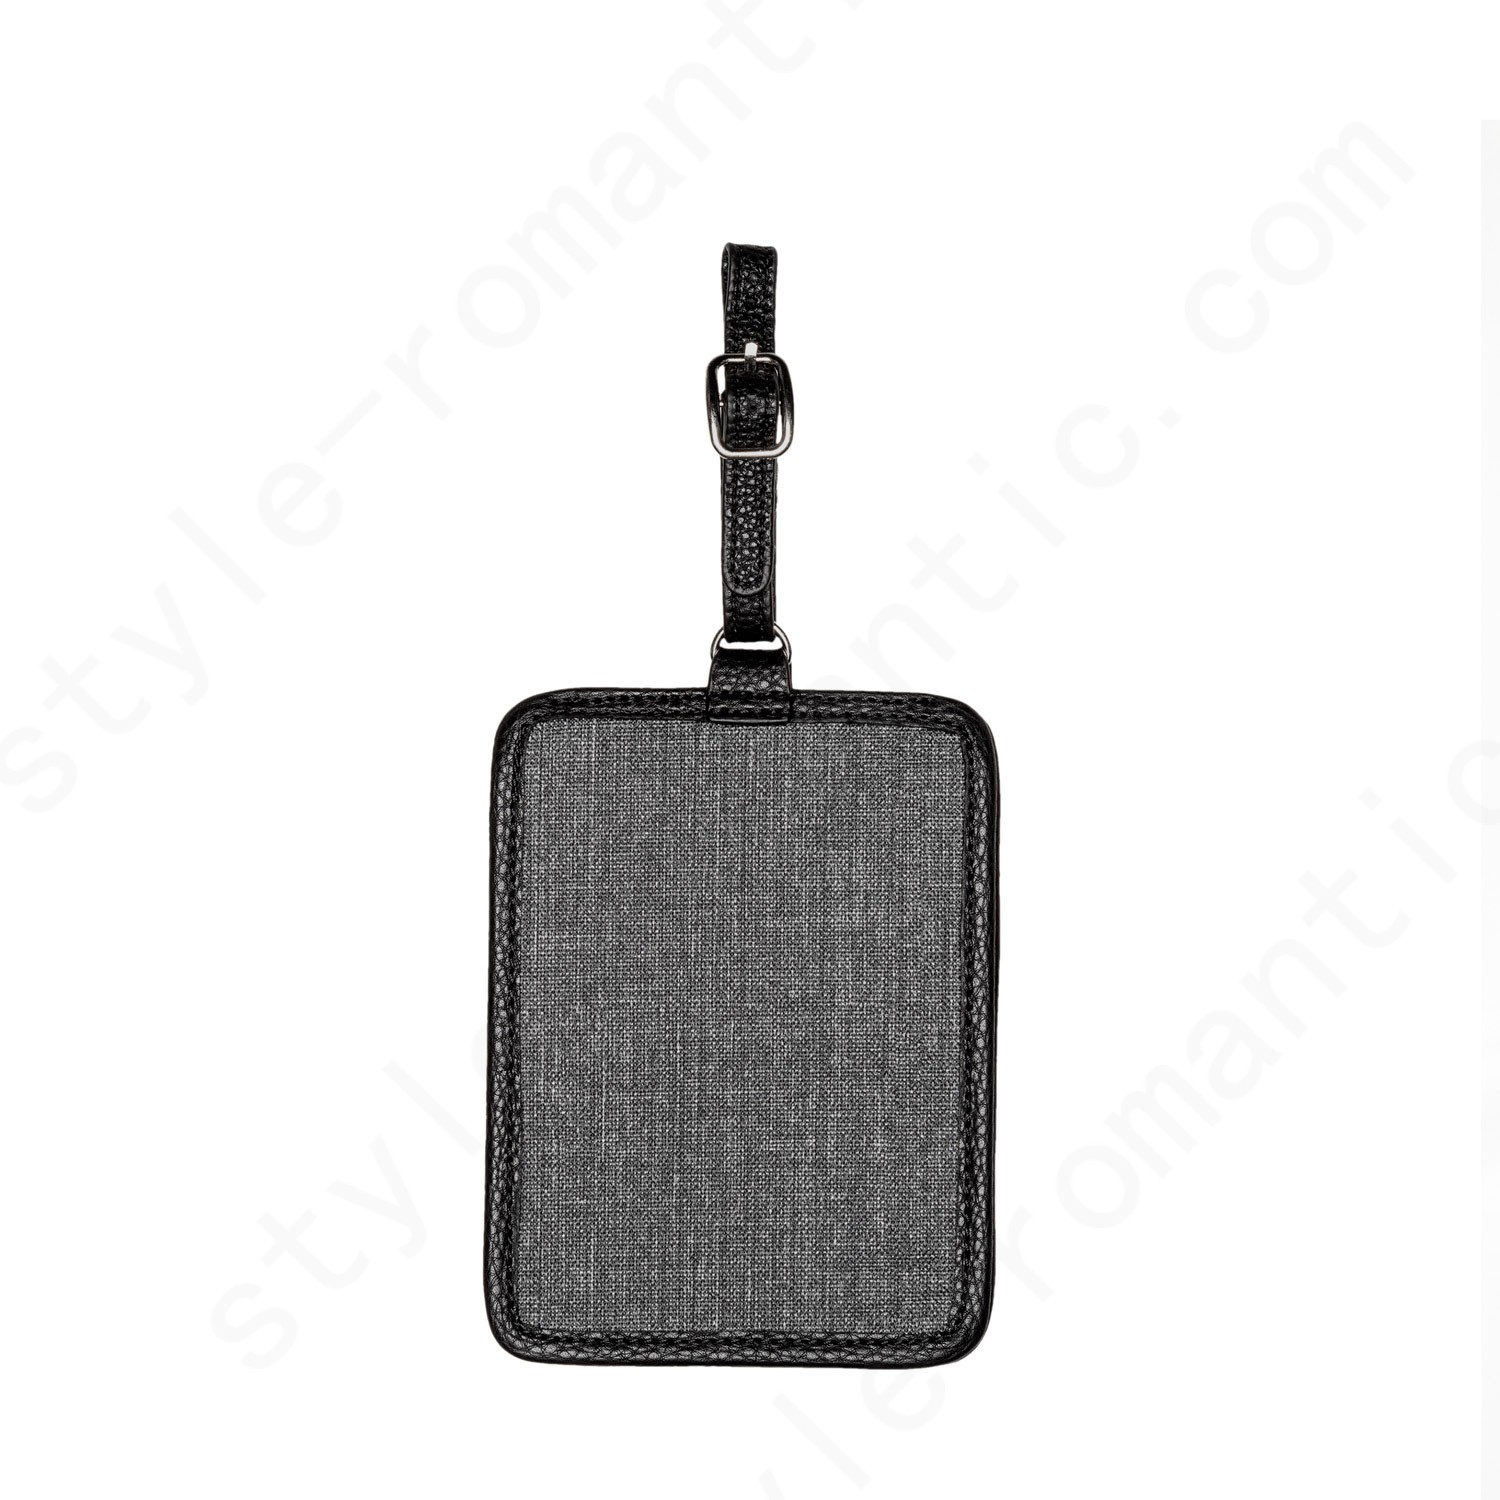 Thirty-One Gifts Carry Me Away Luggage Tag - Charcoal Crosshatch - Thirty-One Gifts Carry Me Away Luggage Tag - Charcoal Crosshatch